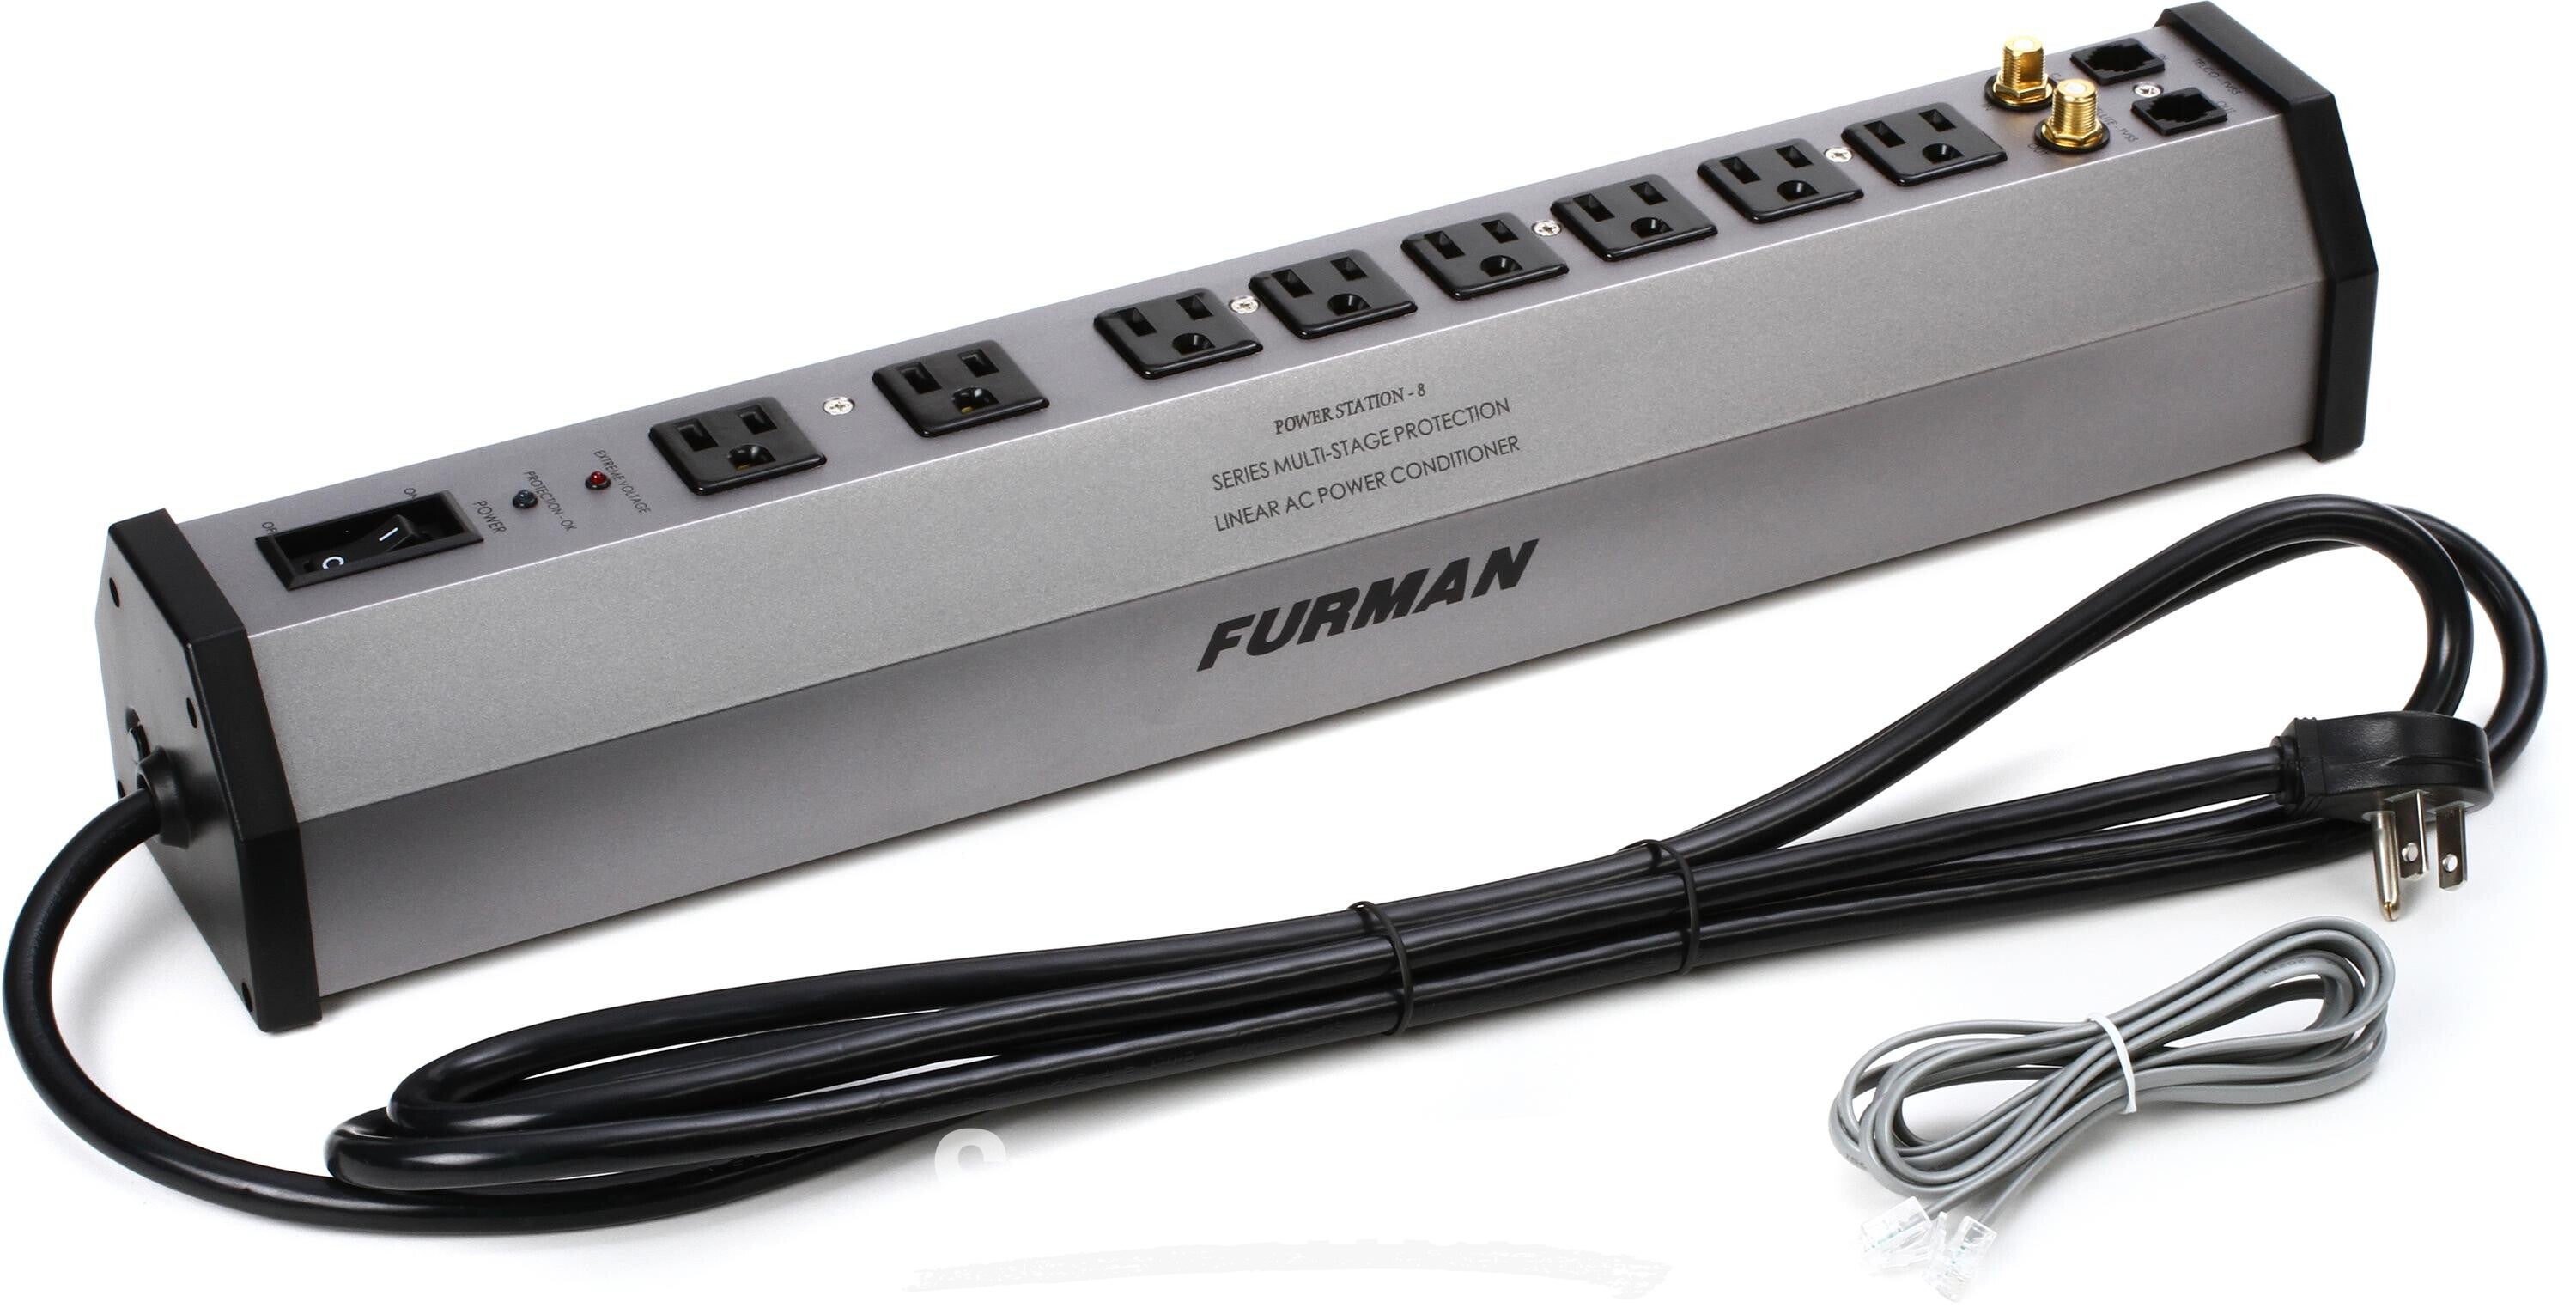 Furman PST-8 8 Outlet Power Station